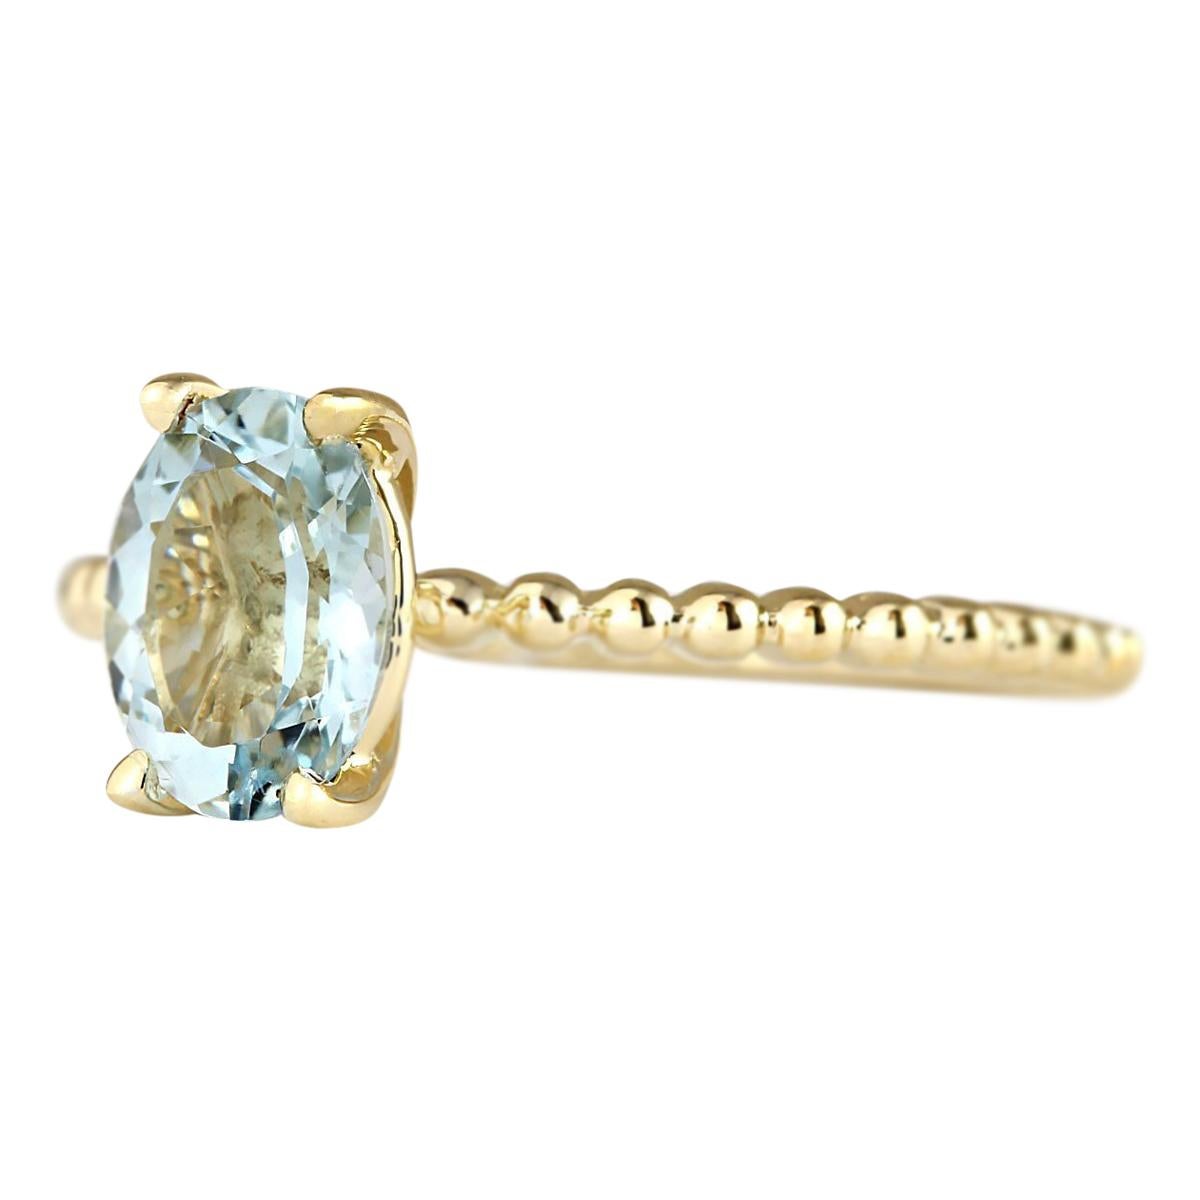 Stamped: 14K Yellow Gold
Total Ring Weight: 2.0 Grams
Total Natural Aquamarine Weight is 1.07 Carat
Color: Blue
Face Measures: 7.00x5.00 mm
Sku: [703234W]